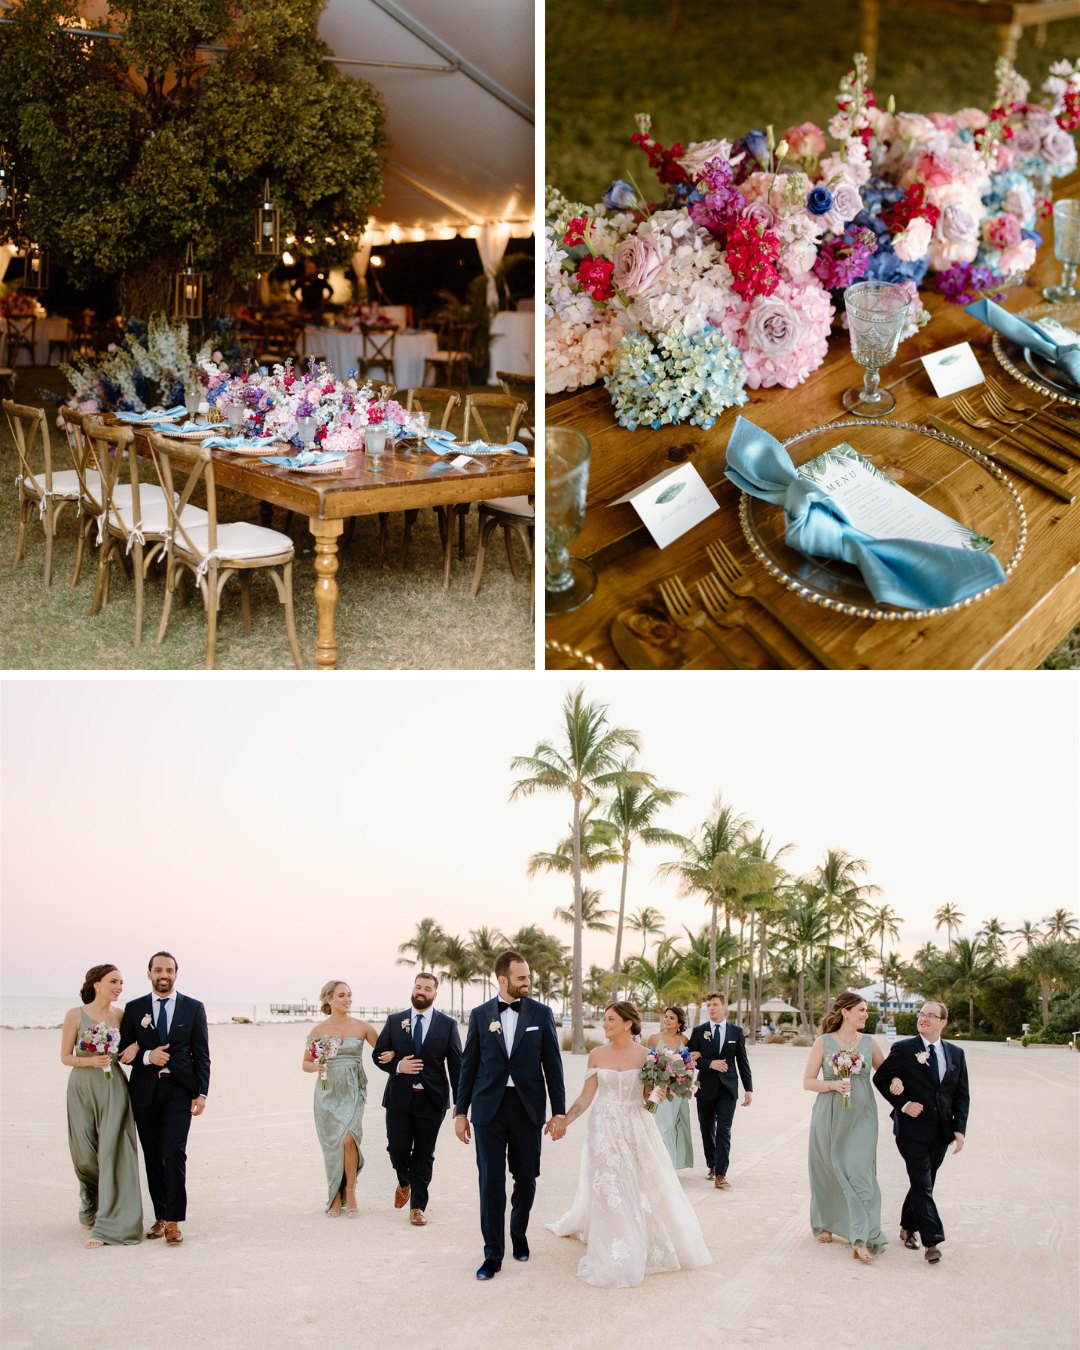 A collage of photos including an Outdoor reception set up with elegant wood tables and chairs, place settings and a wedding party.